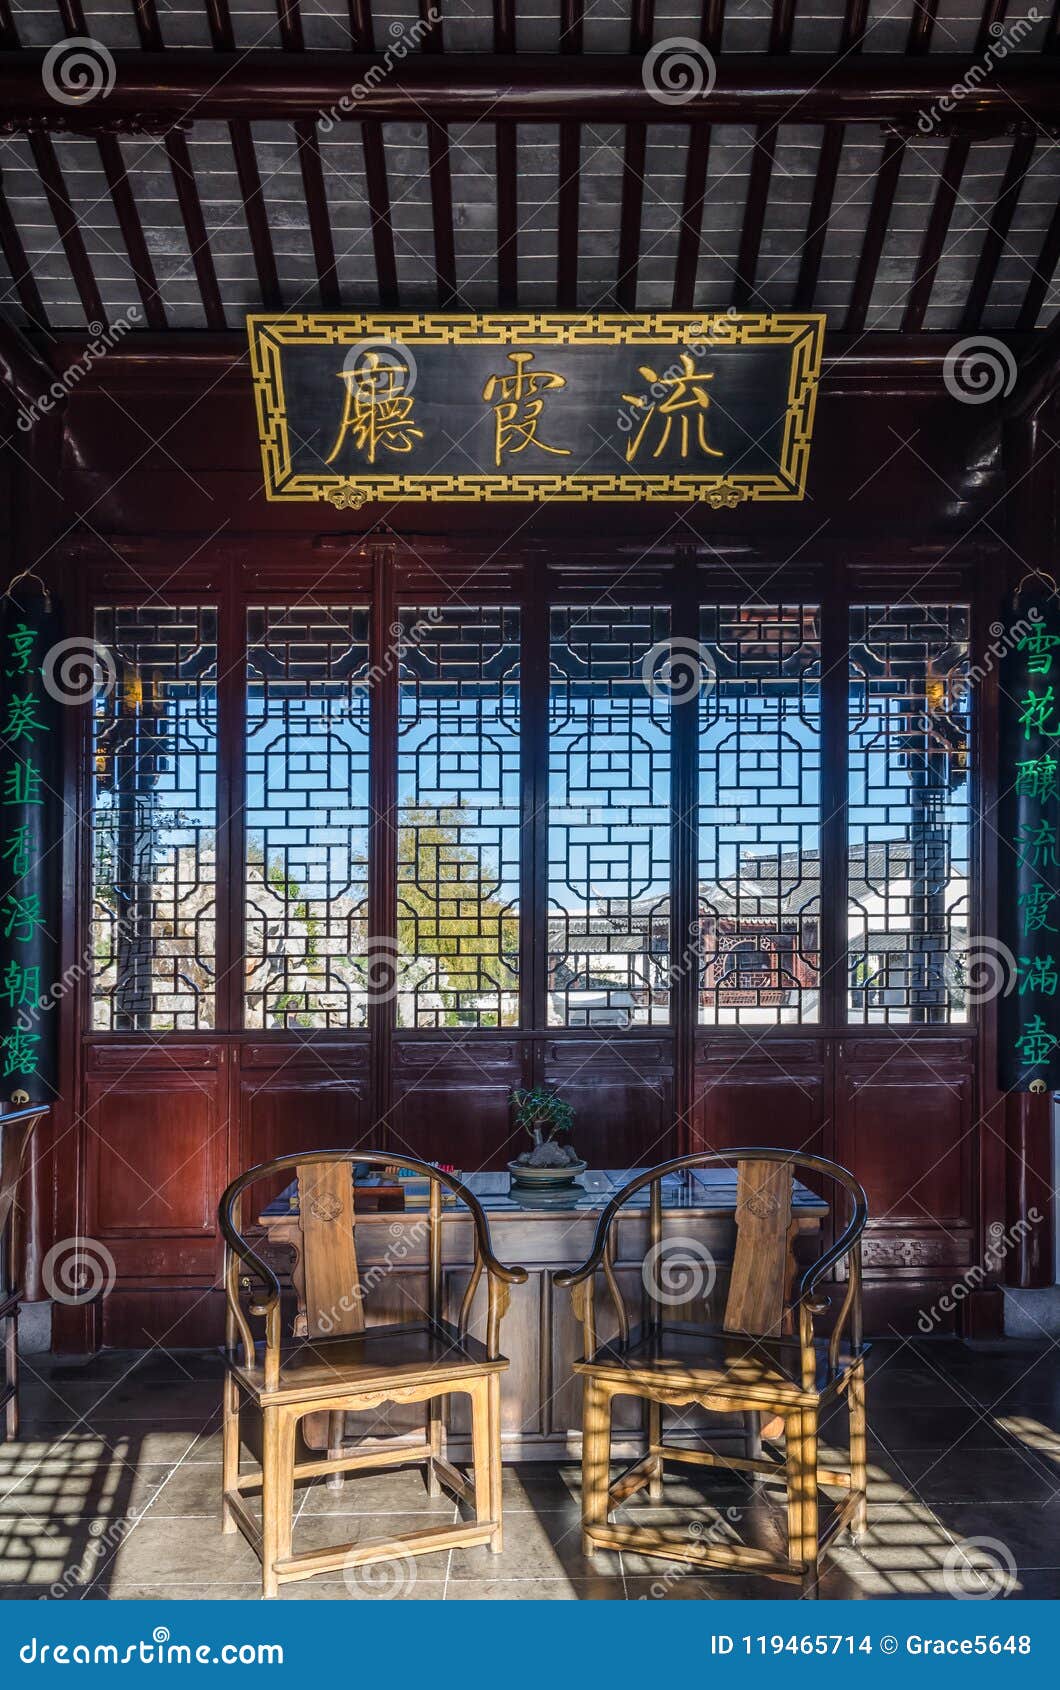 Interior View of the Dunedin Chinese Garden in New 